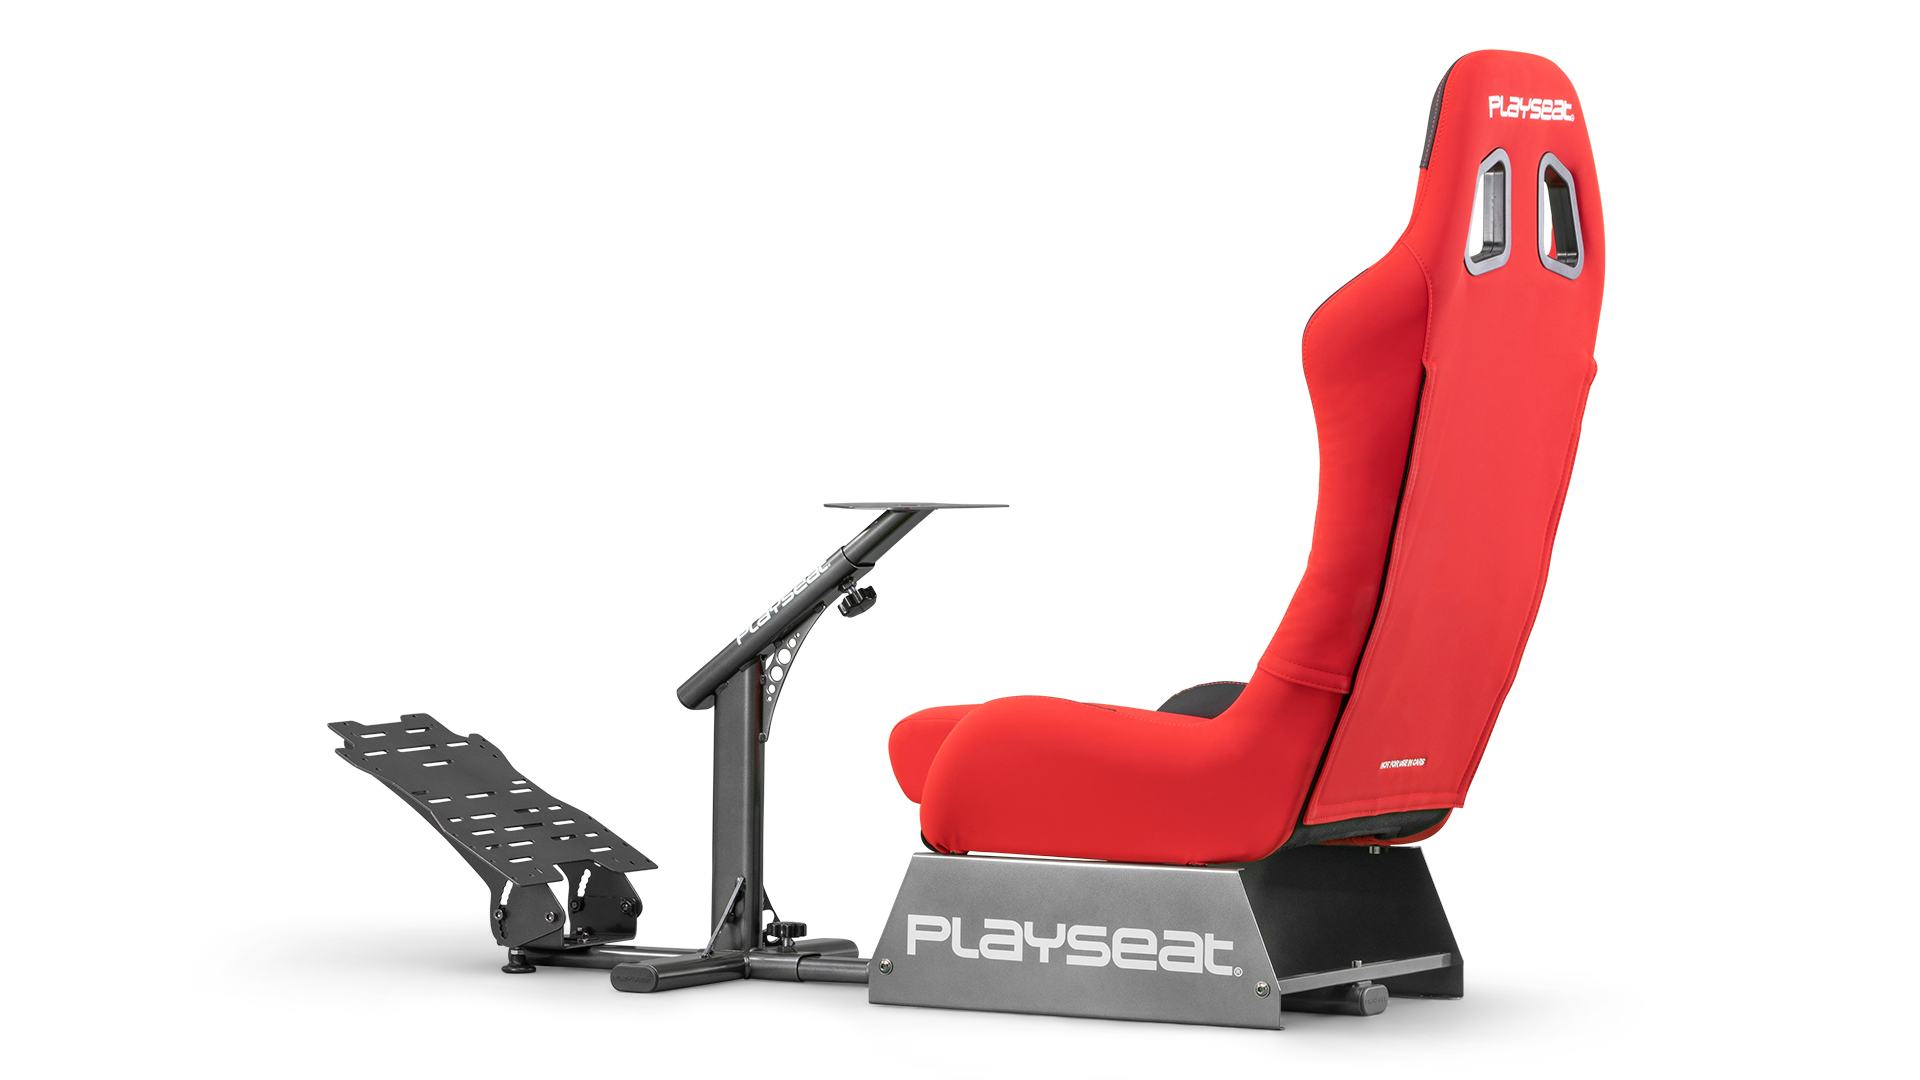 playseat-evolution-red-racing-simulator-back-angle-view-1920x1080-1.png